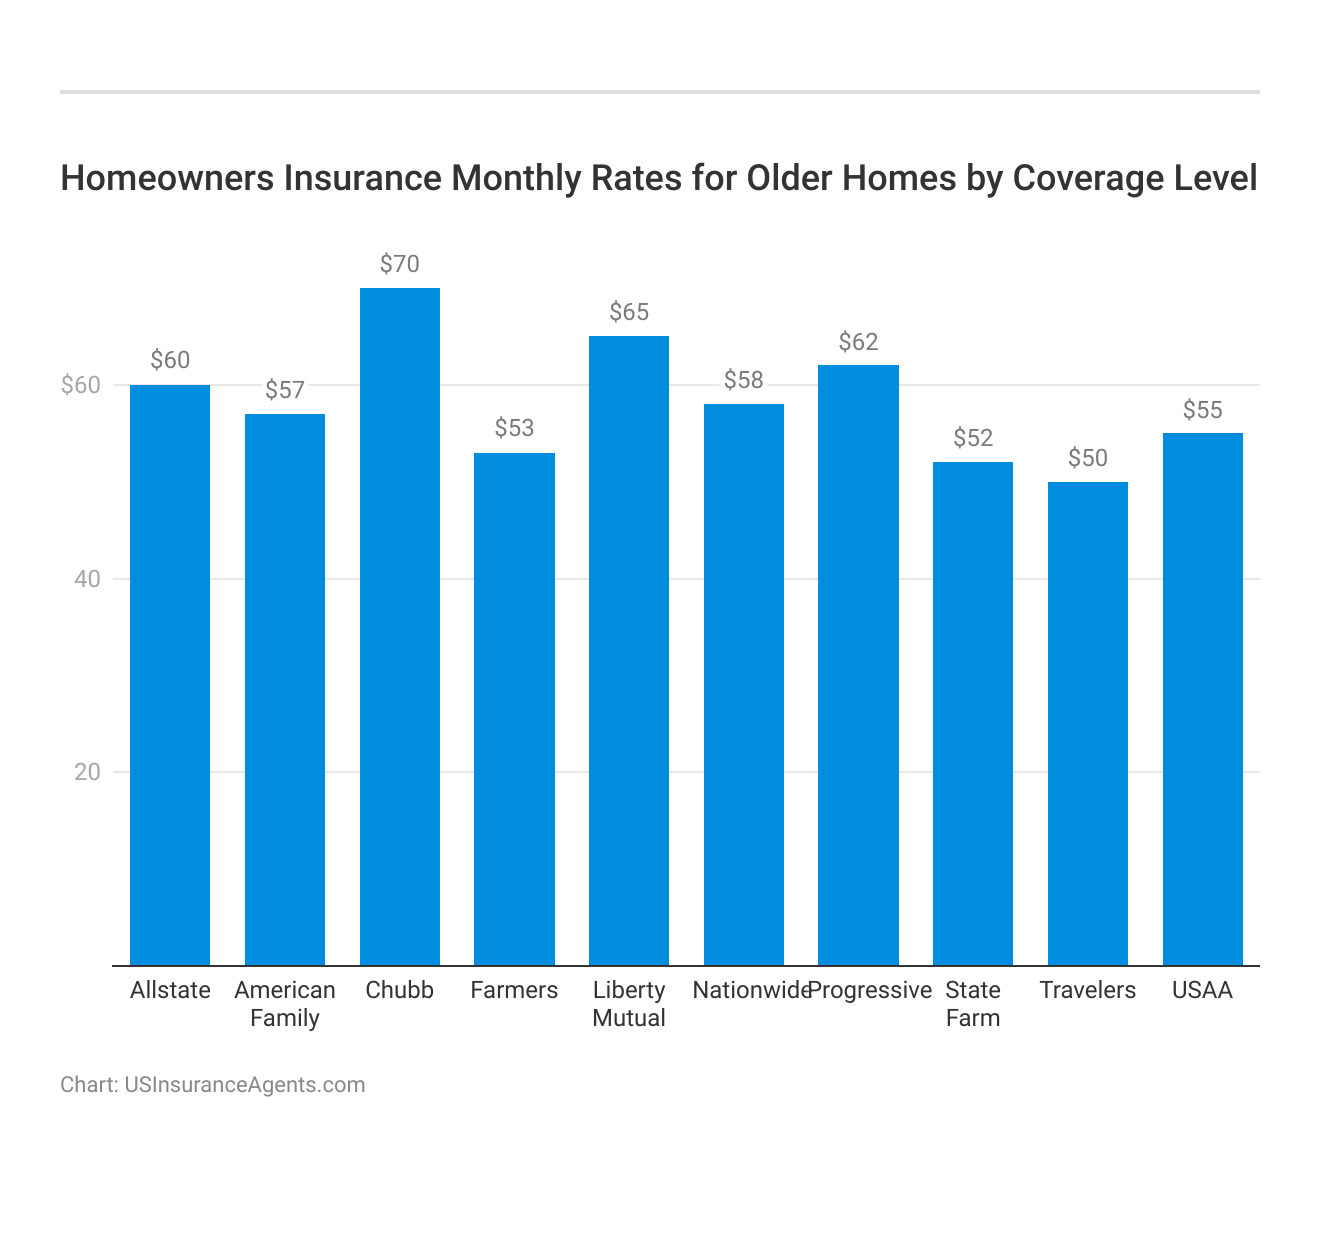 <h3>Homeowners Insurance Monthly Rates for Older Homes by Coverage Level</h3>